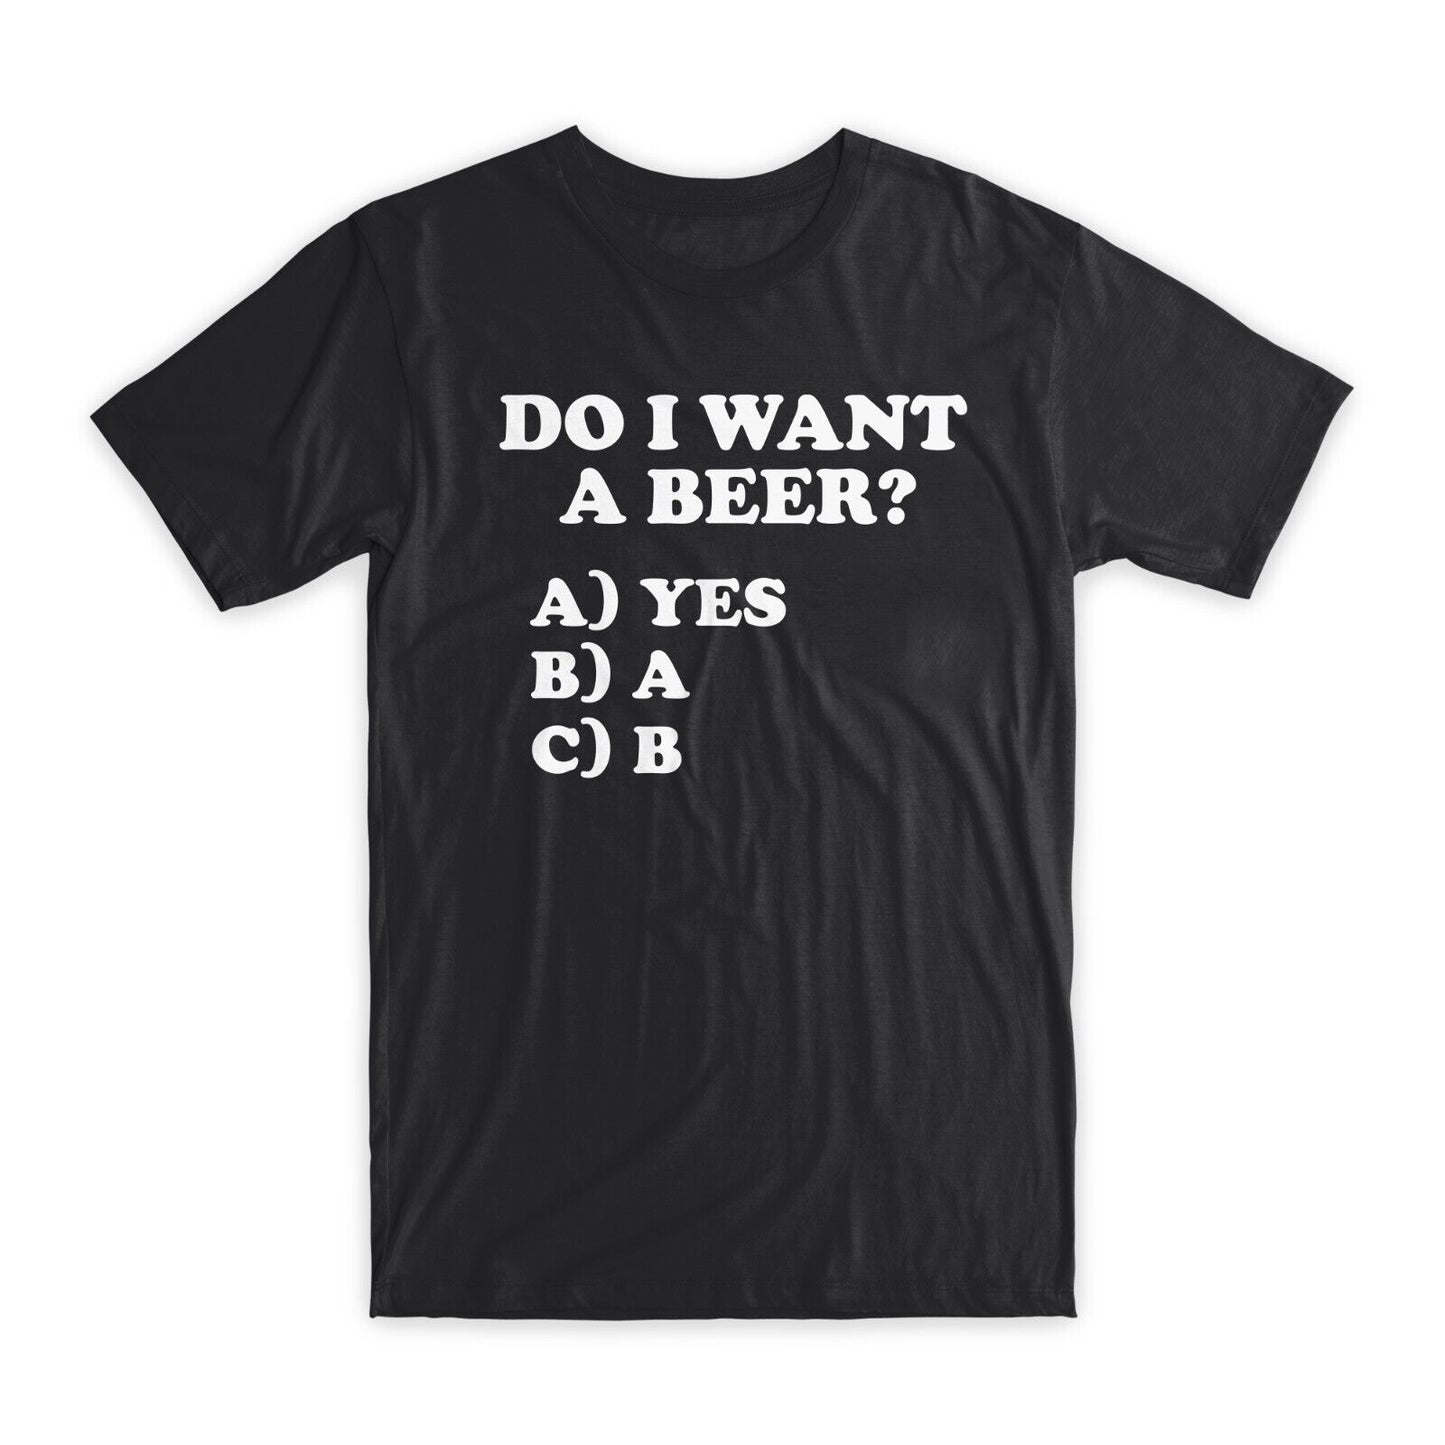 Do I Want Beer T-Shirt Premium Soft Cotton Crew Neck Funny Tees Novelty Gift NEW